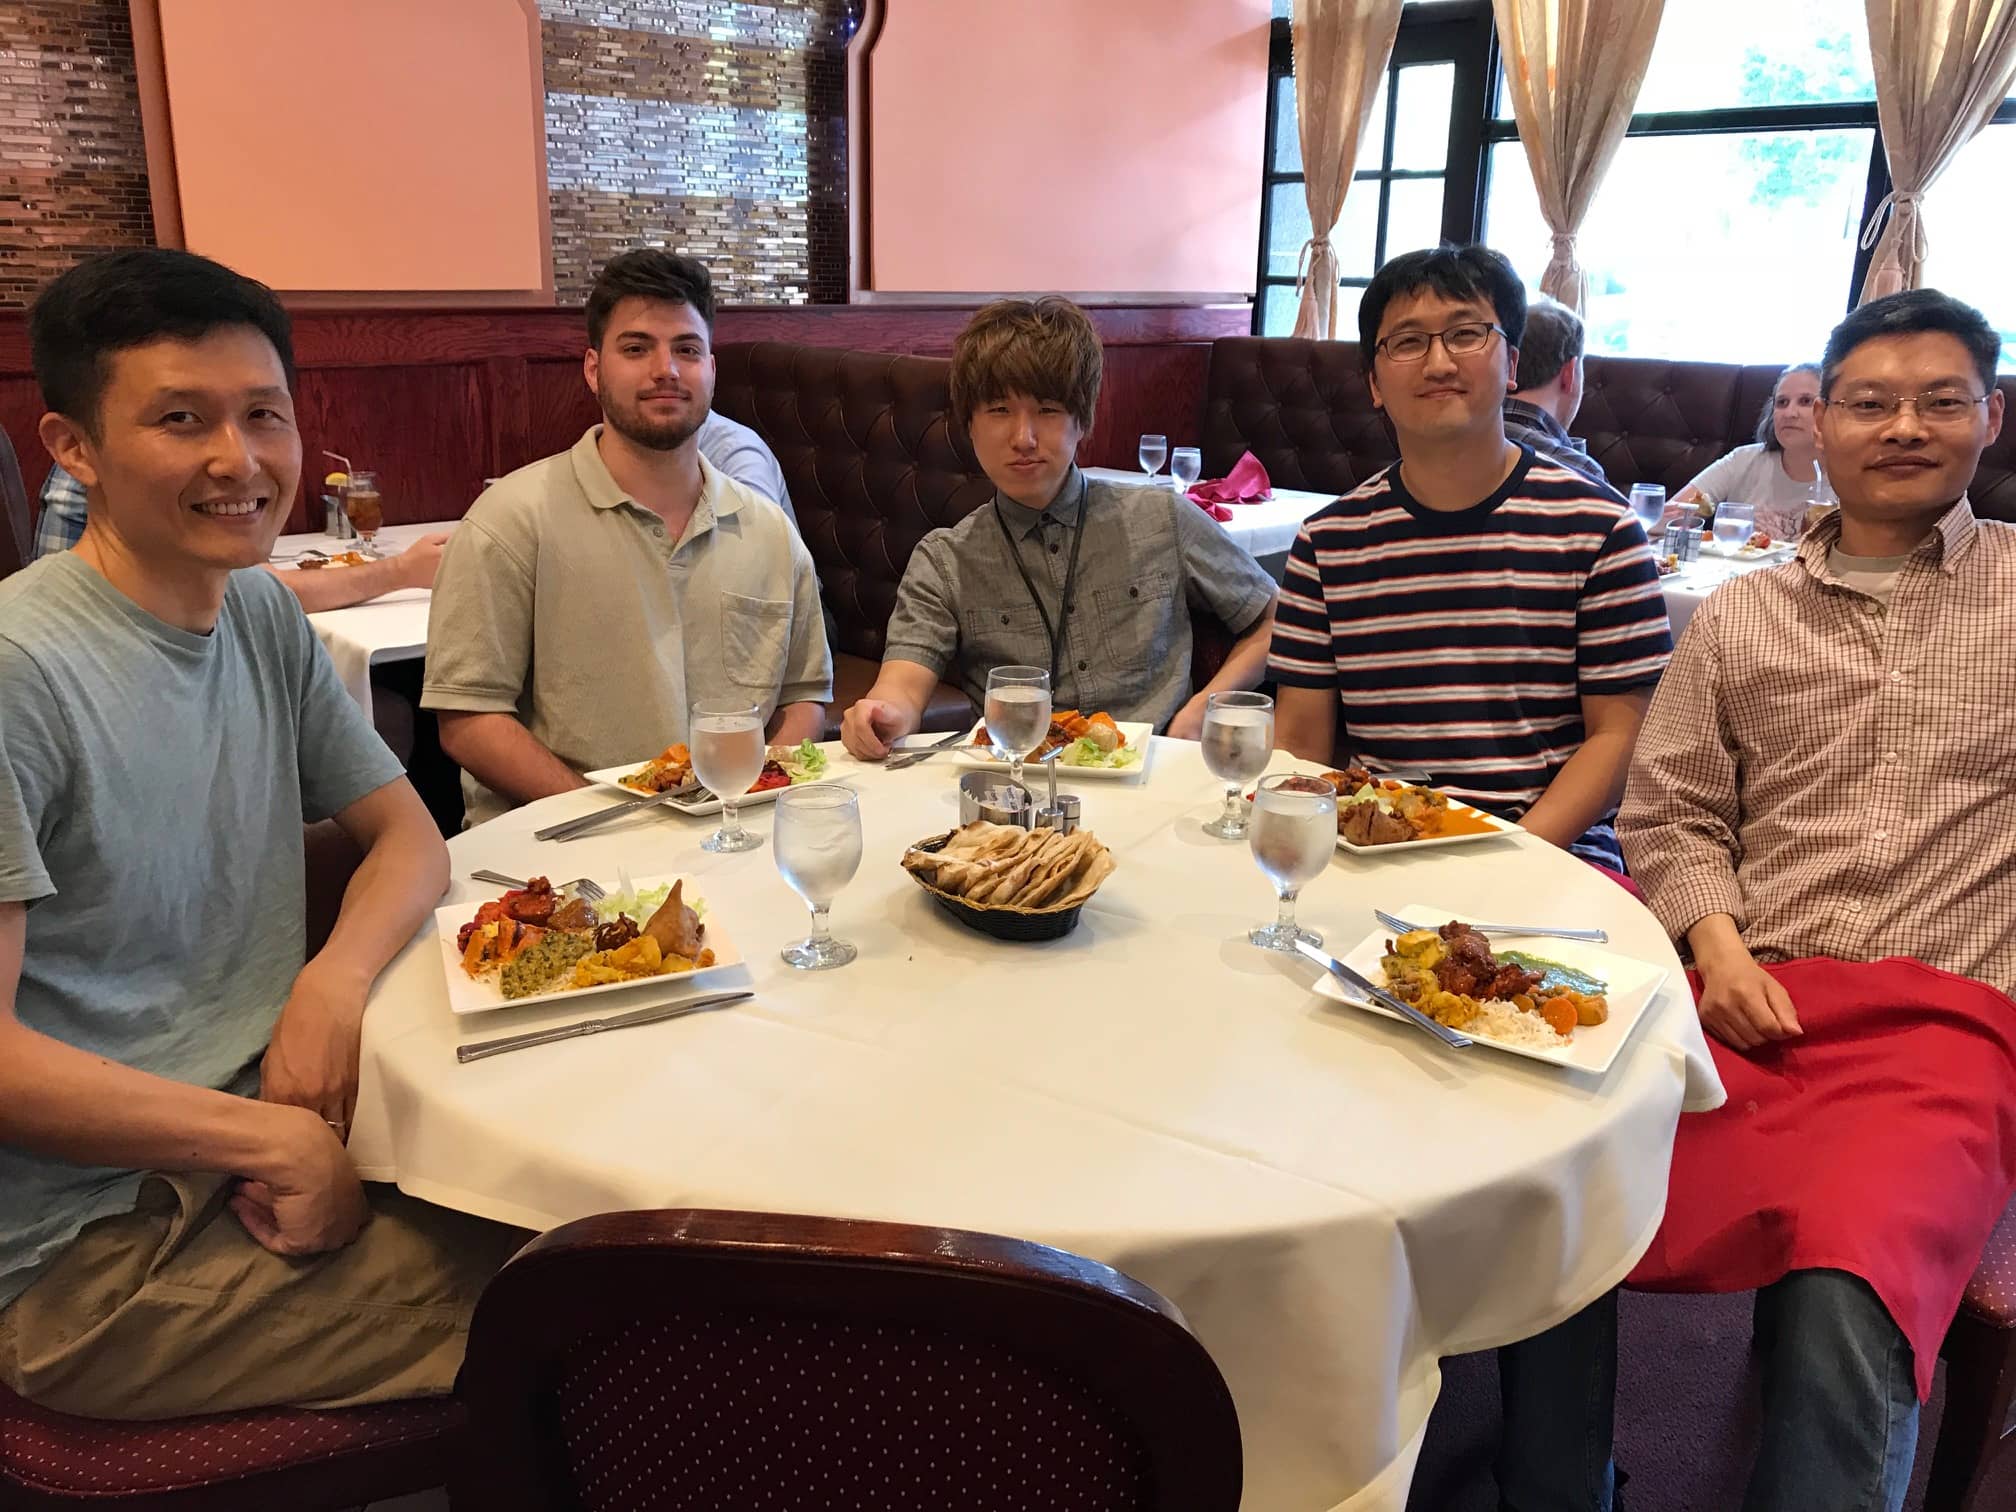 Members of the lab eat lunch around a table.